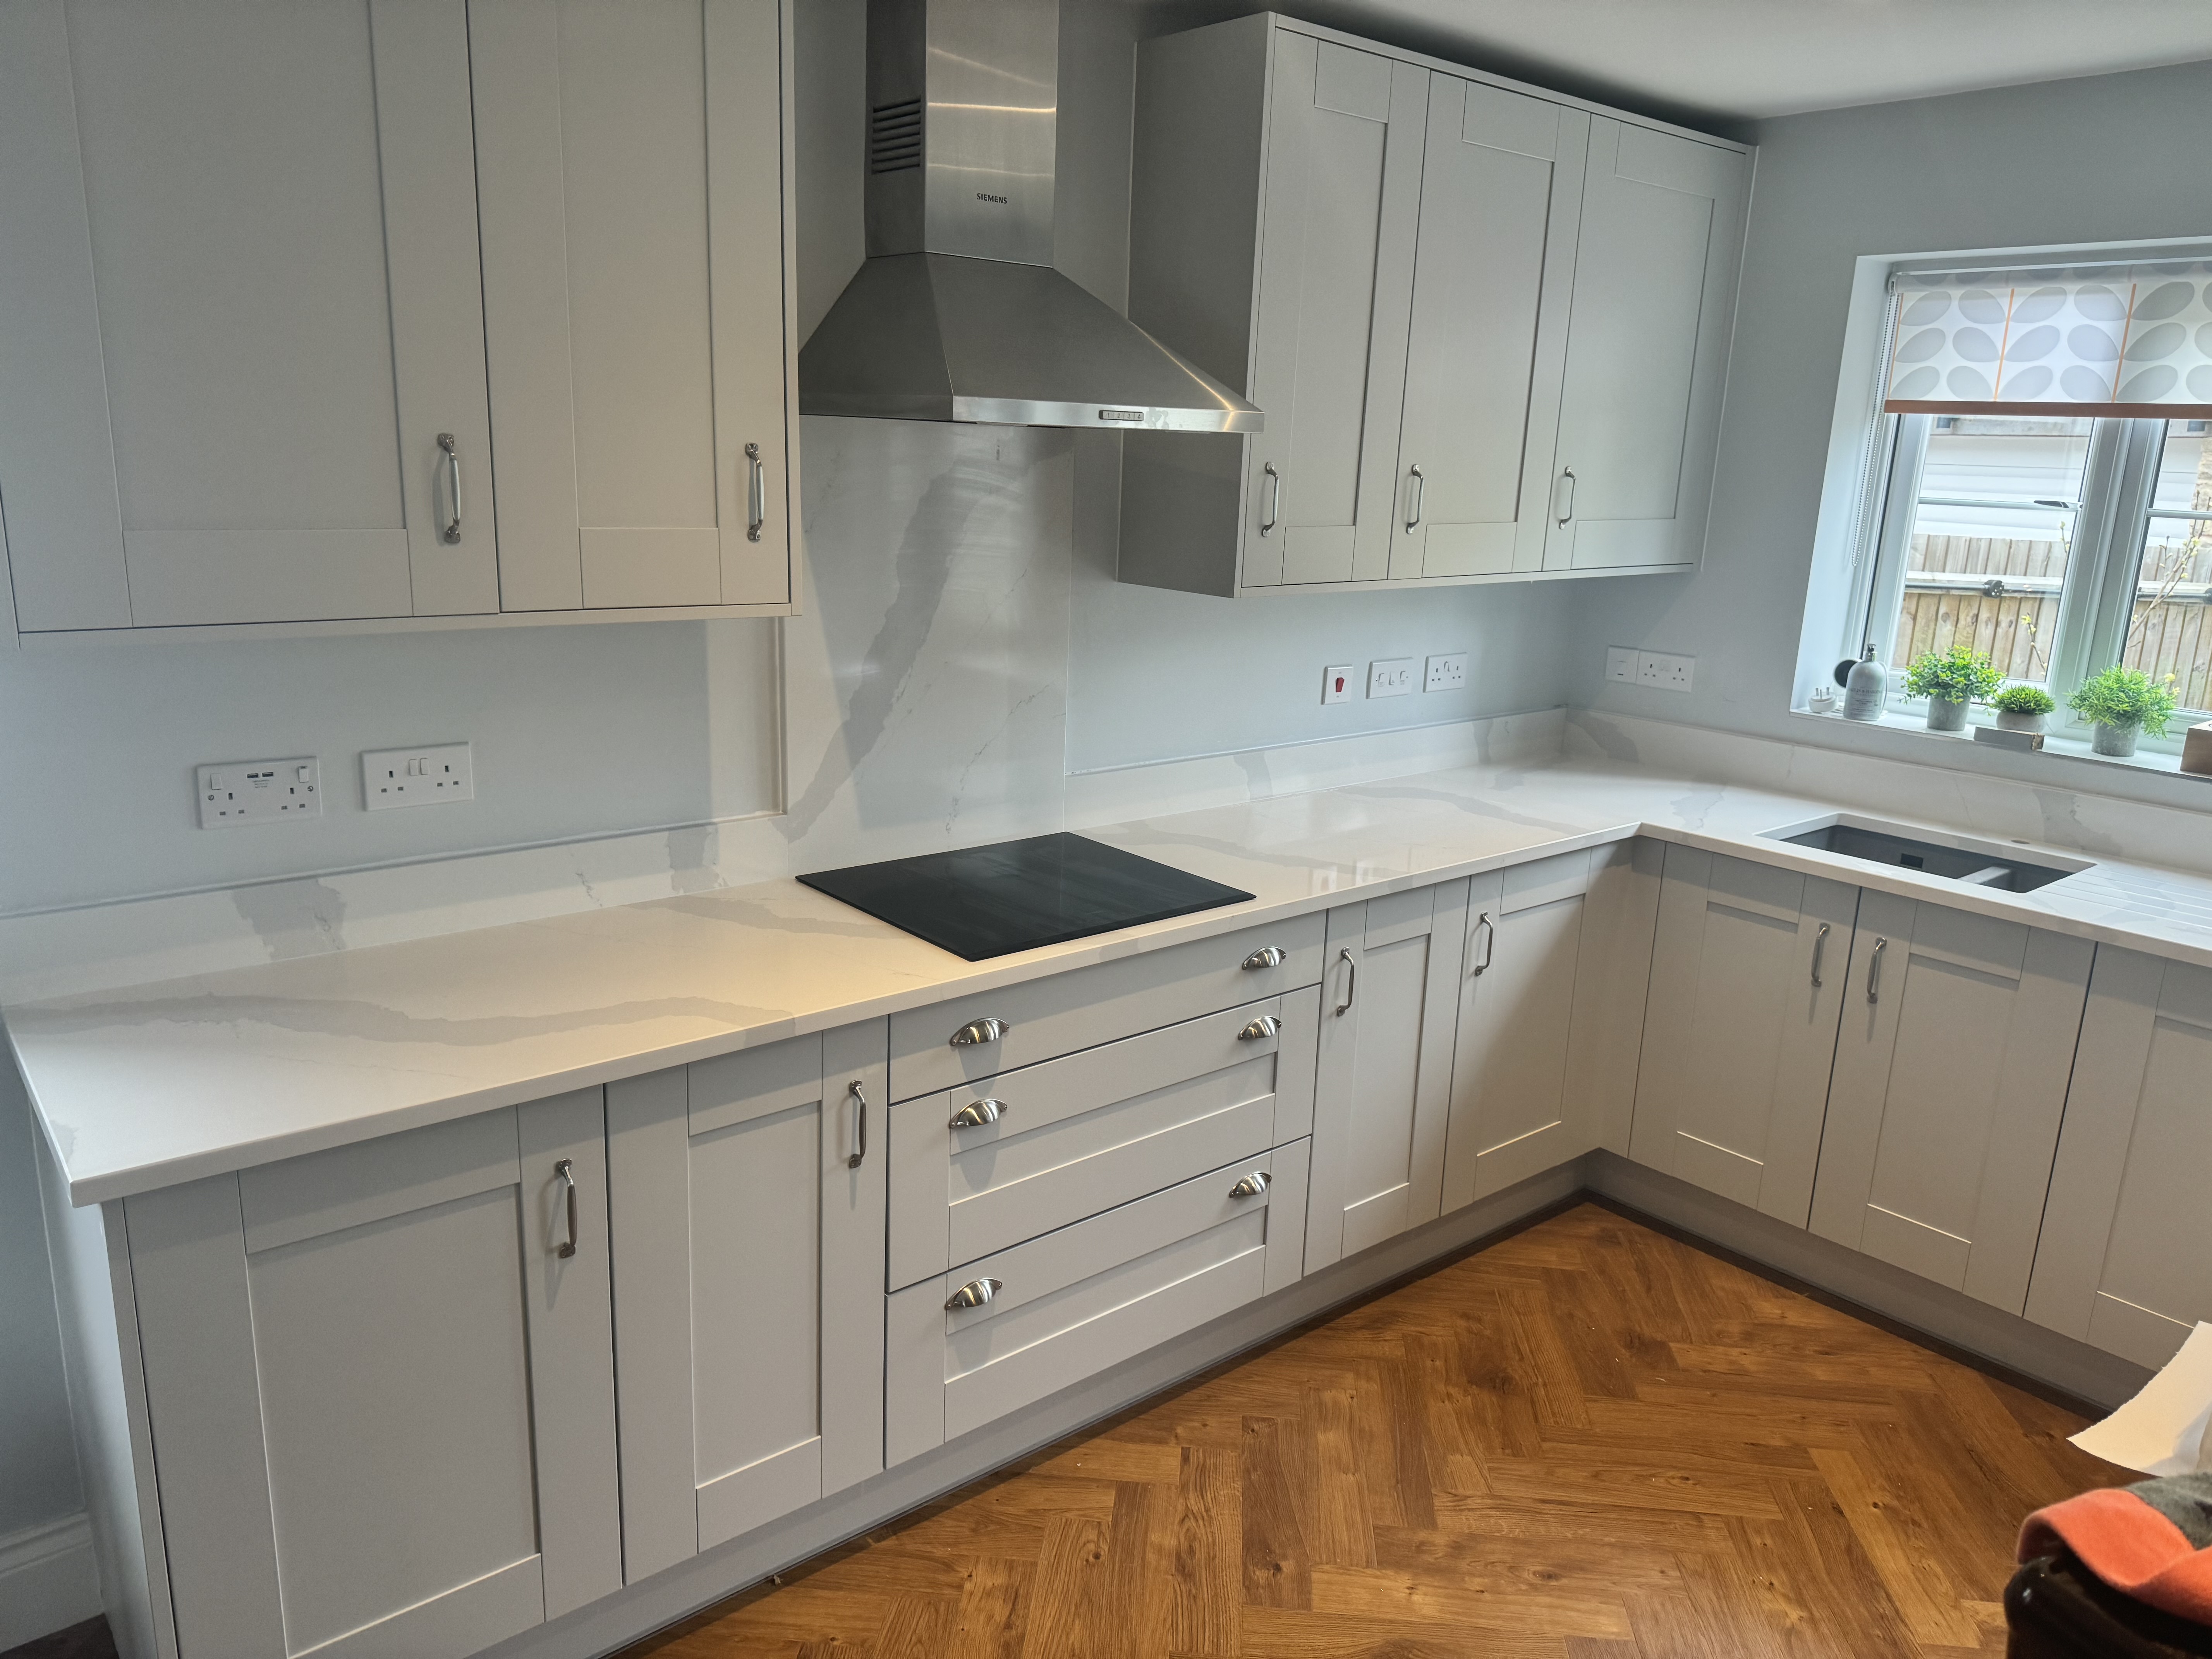 We supply Granite and Quartz Worktops in the east-riding-of-yorkshire Area. We supply Granite and Quartz Worktops in the Anlaby Area. We supply Granite and Quartz Worktops in the Beverley Area. We supply Granite and Quartz Worktops in the Bridlington Area. We supply Granite and Quartz Worktops in the Brough Area. We supply Granite and Quartz Worktops in the Cottingham Area. We supply Granite and Quartz Worktops in the Driffield Area. We supply Granite and Quartz Worktops in the Goole Area. We supply Granite and Quartz Worktops in the Hedon Area. We supply Granite and Quartz Worktops in the Hessle Area. We supply Granite and Quartz Worktops in the Hornsea Area. We supply Granite and Quartz Worktops in the Howden Area. We supply Granite and Quartz Worktops in the Leven Area. We supply Granite and Quartz Worktops in the Market-Weighton Area. We supply Granite and Quartz Worktops in the Patrington Area. We supply Granite and Quartz Worktops in the Pocklington Area. We supply Granite and Quartz Worktops in the Preston Area. We supply Granite and Quartz Worktops in the Snaith Area. We supply Granite and Quartz Worktops in the South-Cave Area. We supply Granite and Quartz Worktops in the Willerby Area. We supply Granite and Quartz Worktops in the Withernsea Area.